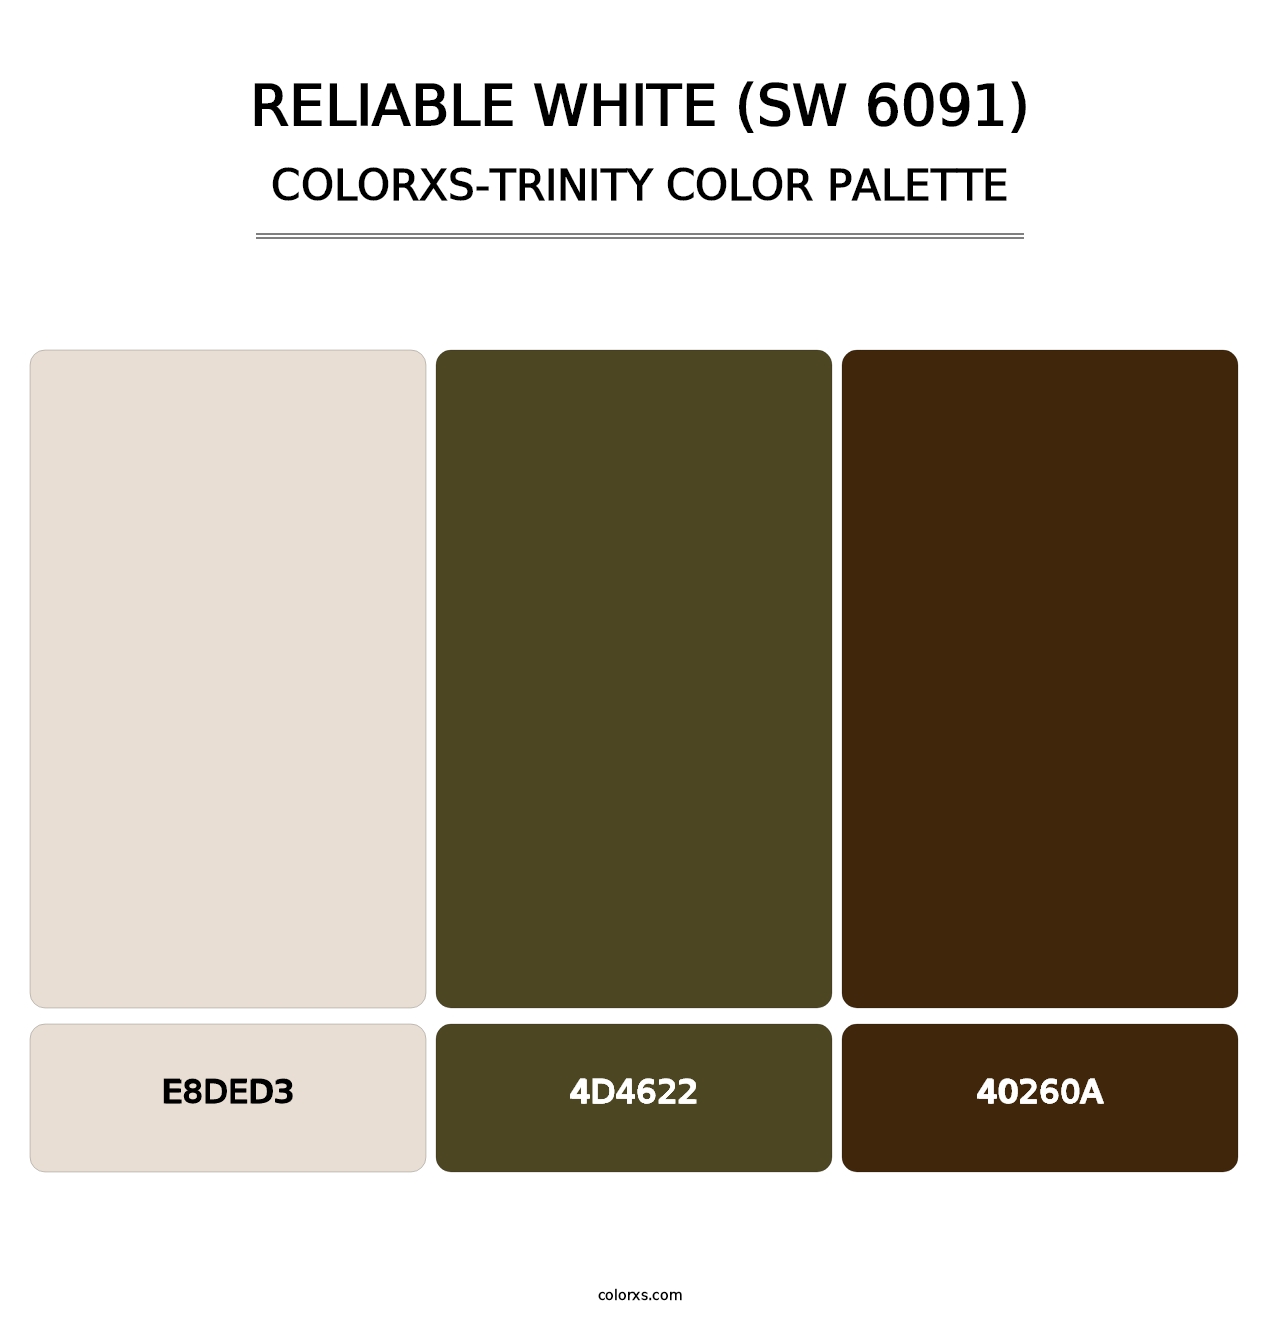 Reliable White (SW 6091) - Colorxs Trinity Palette